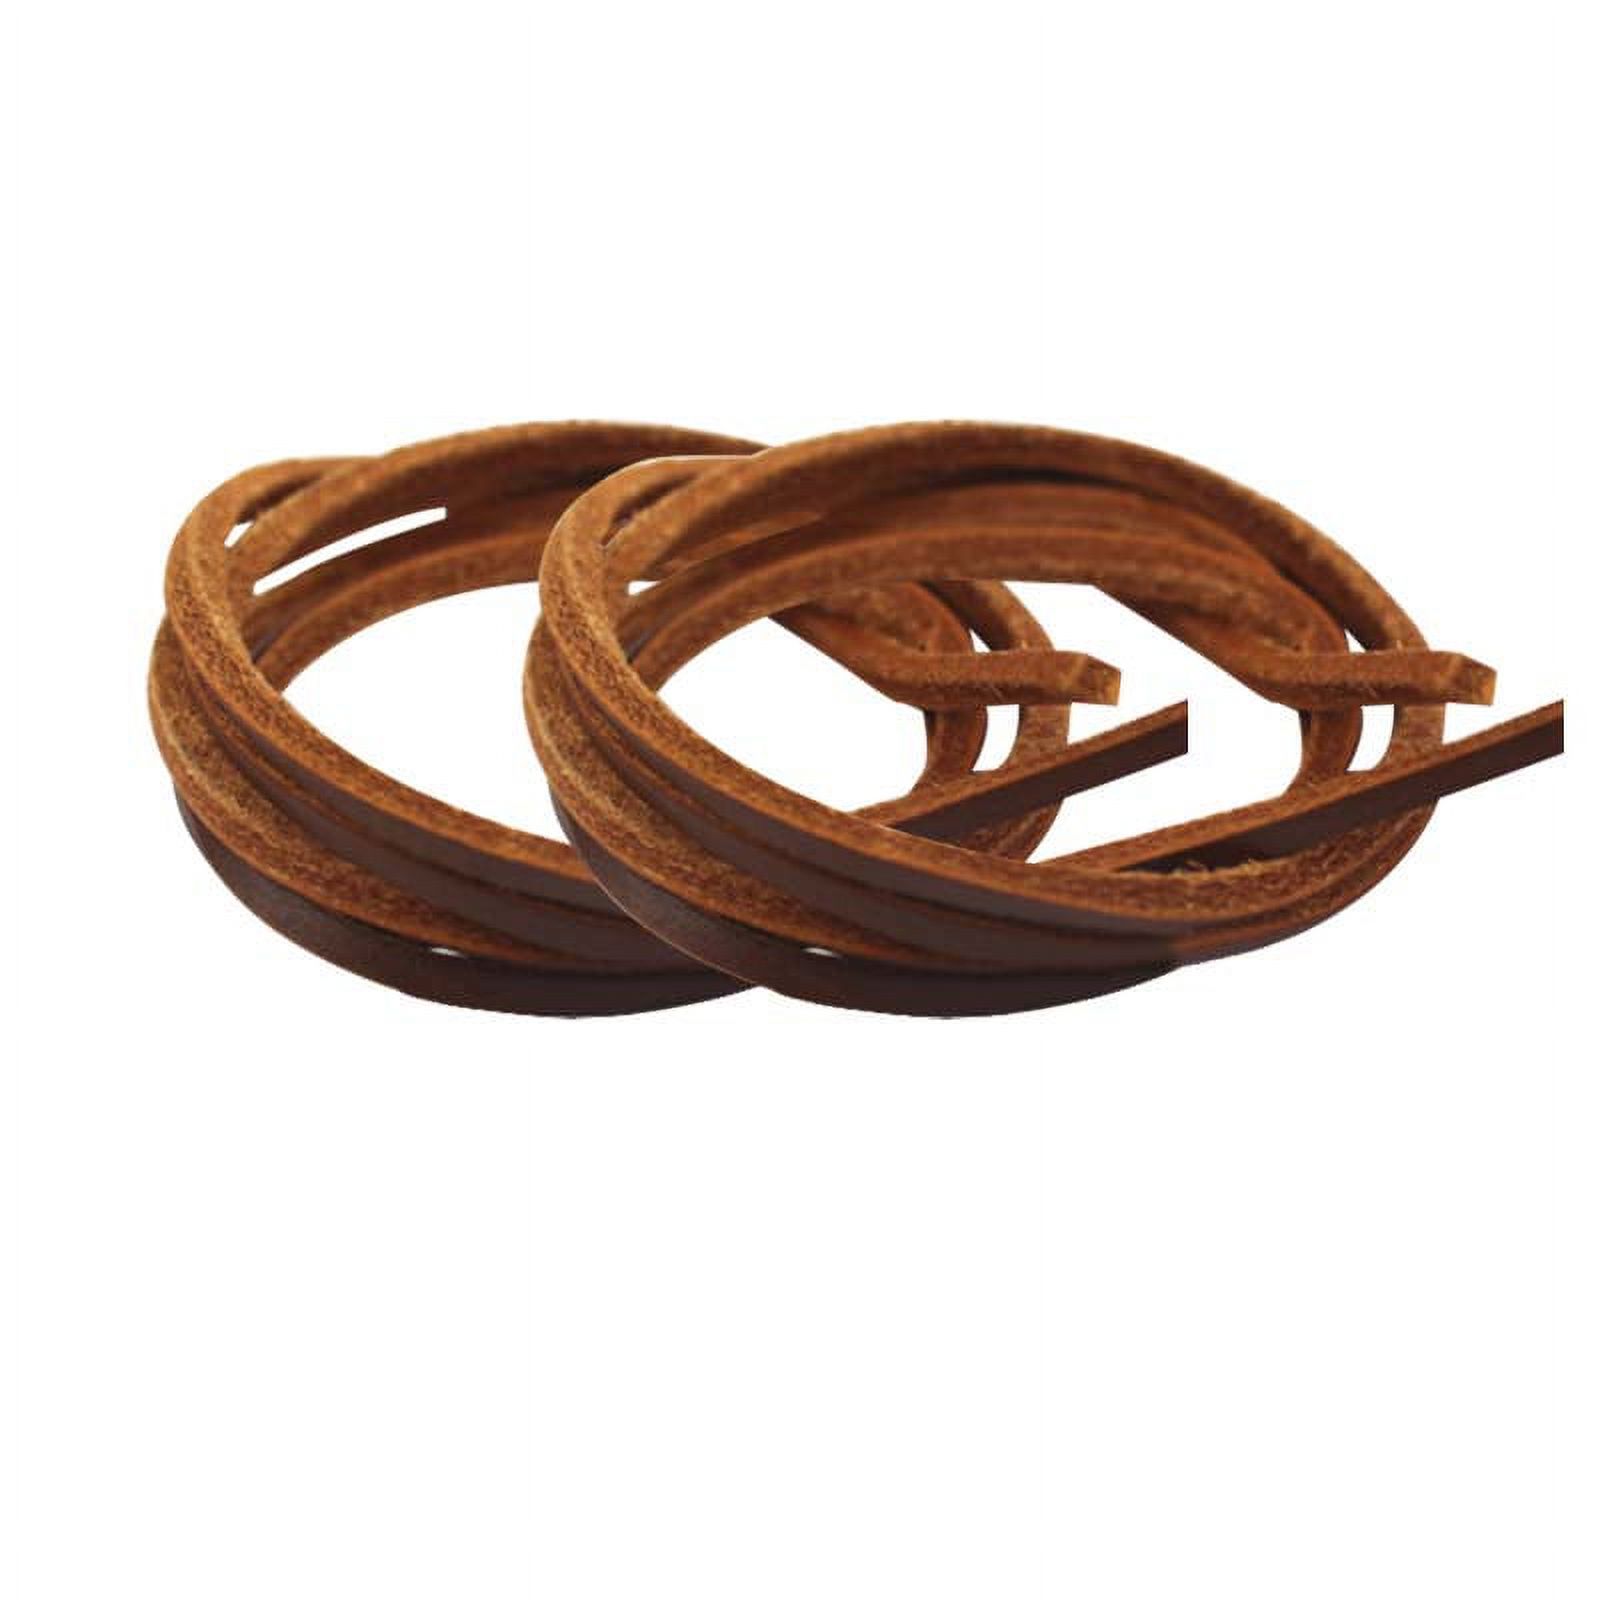 Leather Shoelaces Mens Boat Shoe Laces-Square Shoestring C9Q0 Leisure Thin K3N9 - image 5 of 9